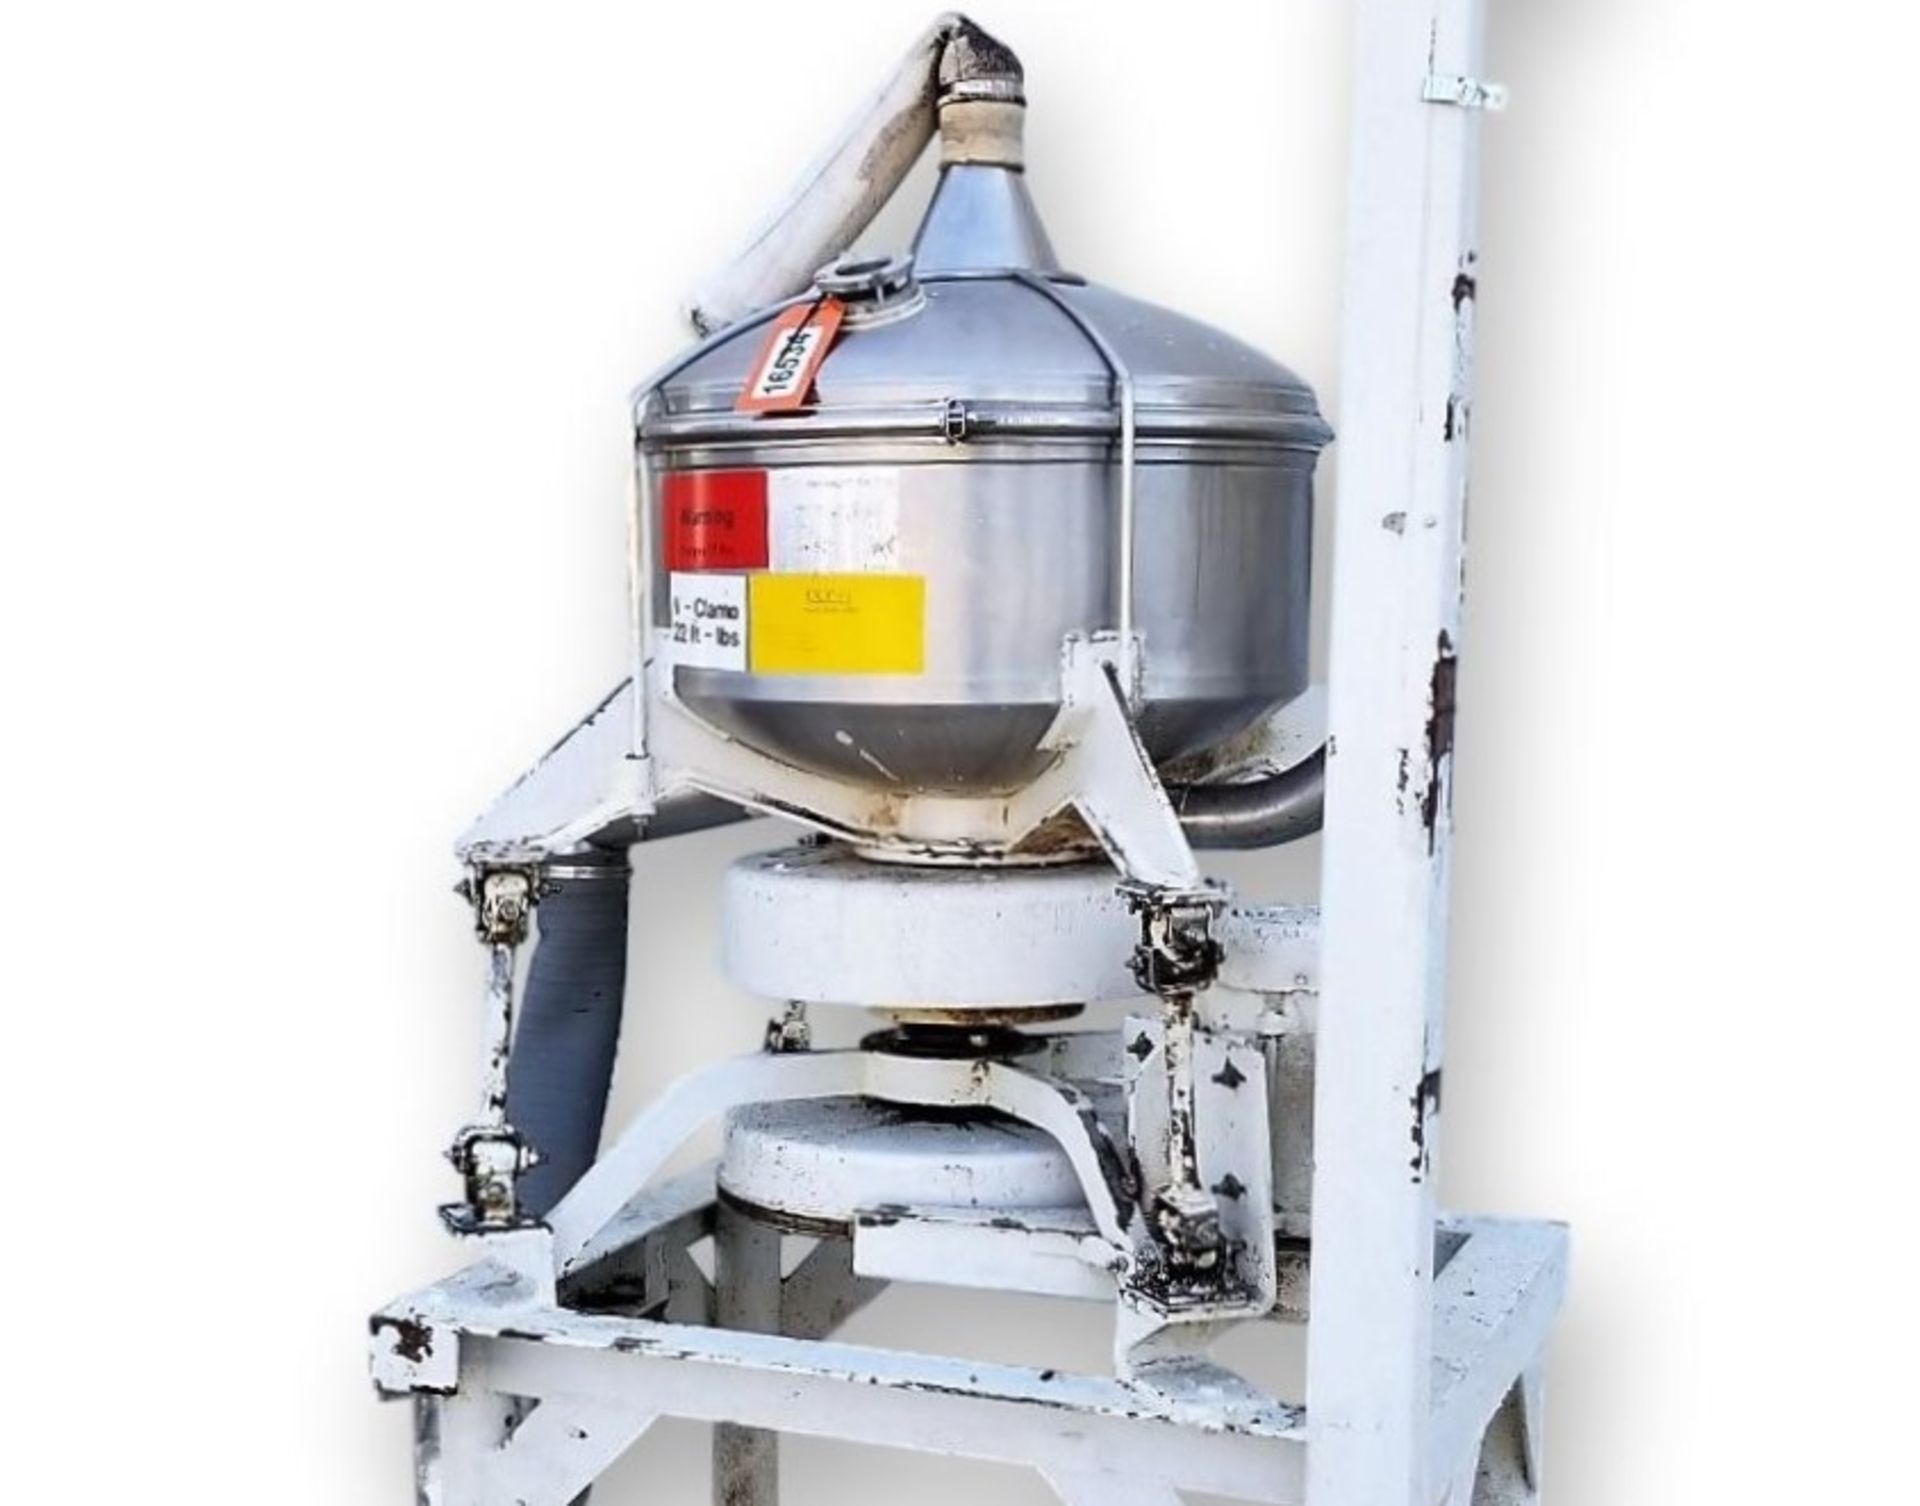 Lot Location: Greensboro NC Used 30" Pfening Pressure Flour Sifter Ð Stainless Steel - Image 3 of 9